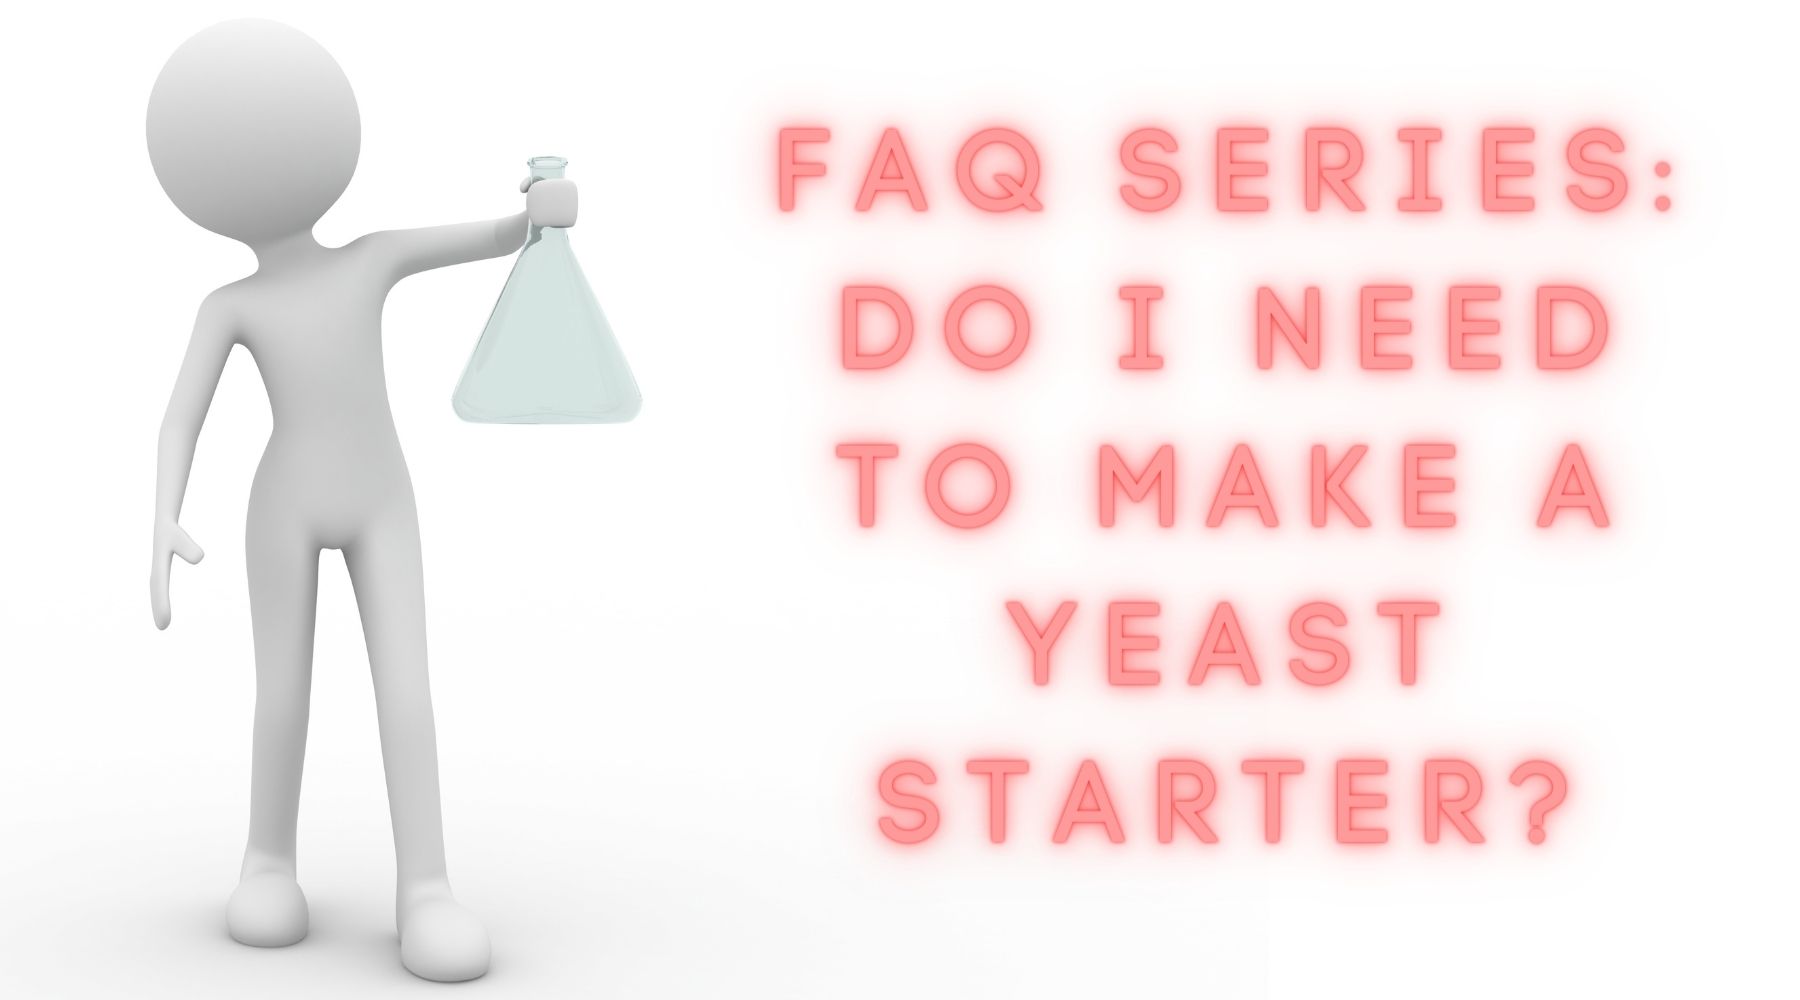 Yeast Starters Part One: When To Make A Yeast Starter